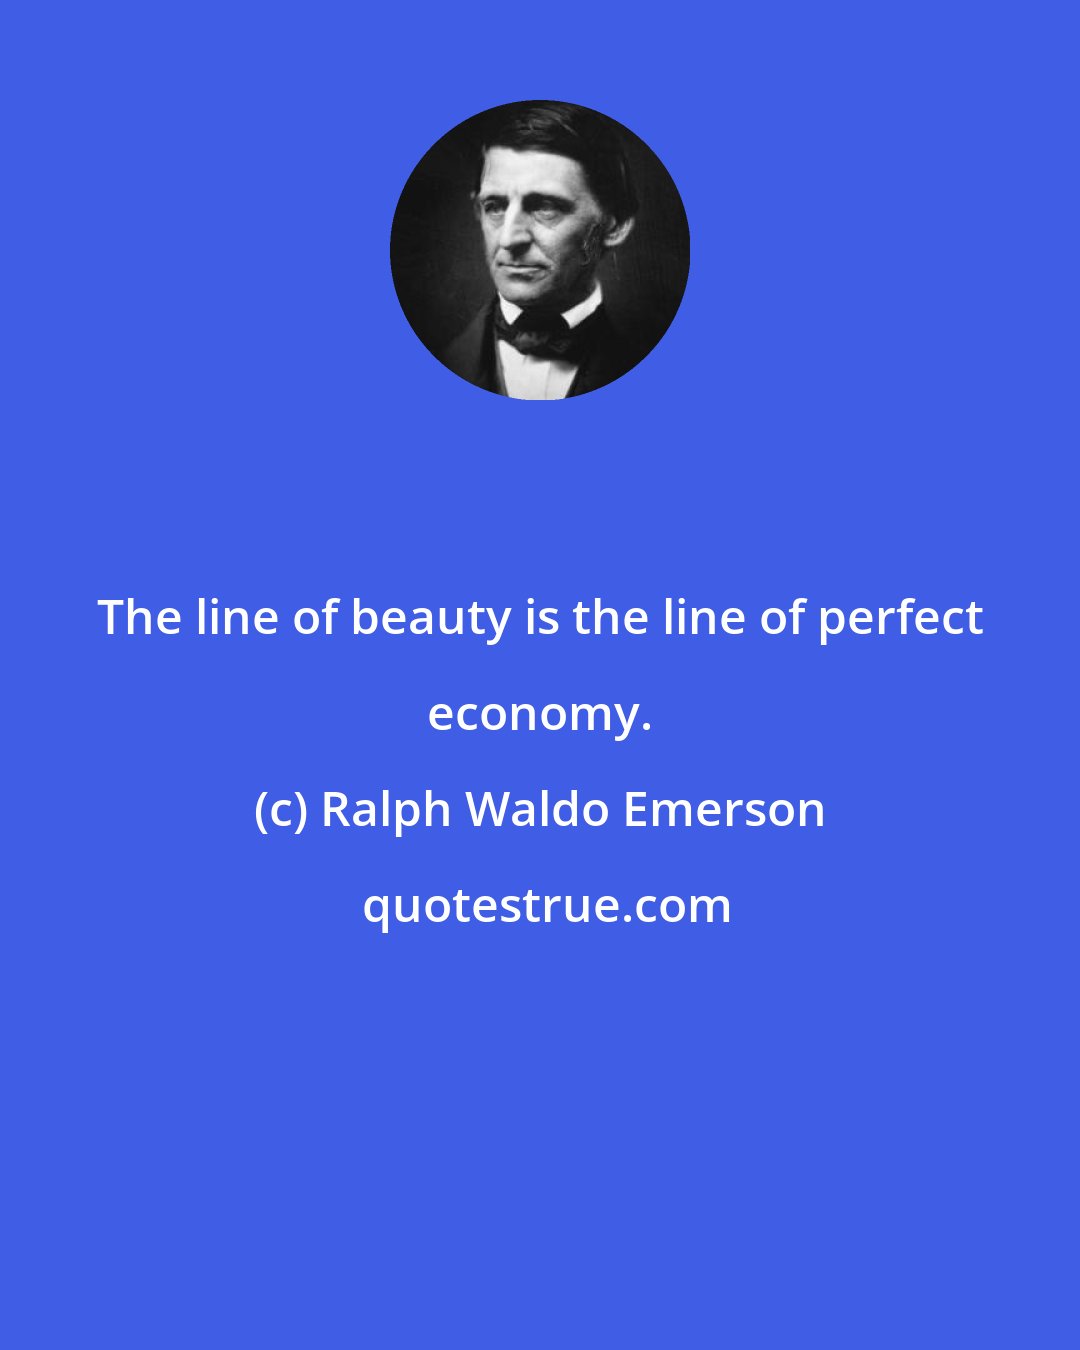 Ralph Waldo Emerson: The line of beauty is the line of perfect economy.